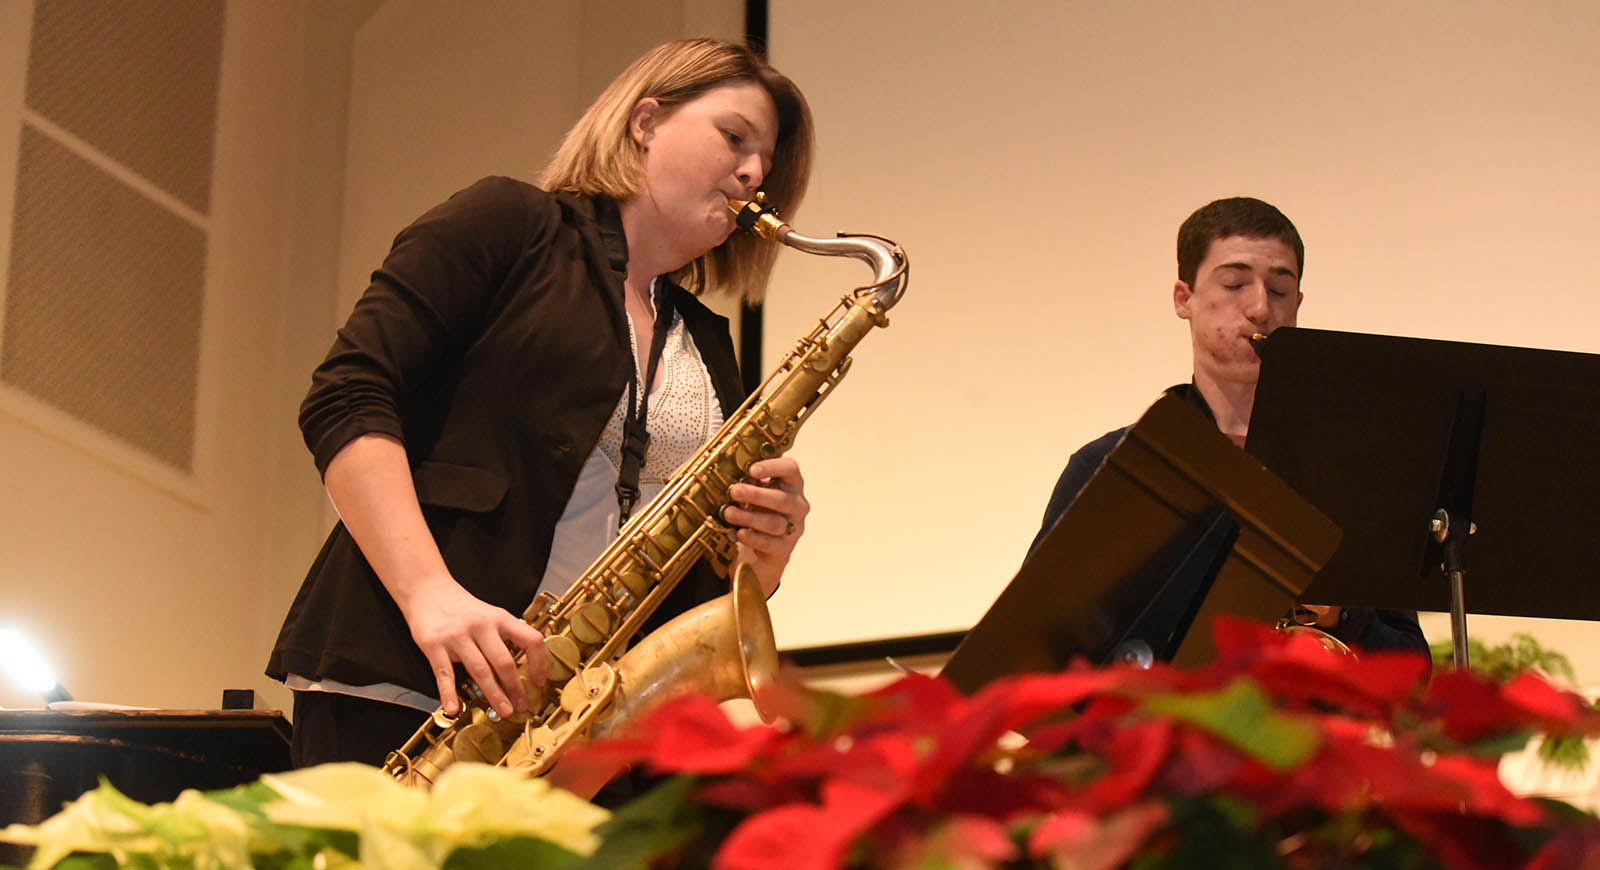 Photo of a woman playing a saxophone with poinsettas in the foreground